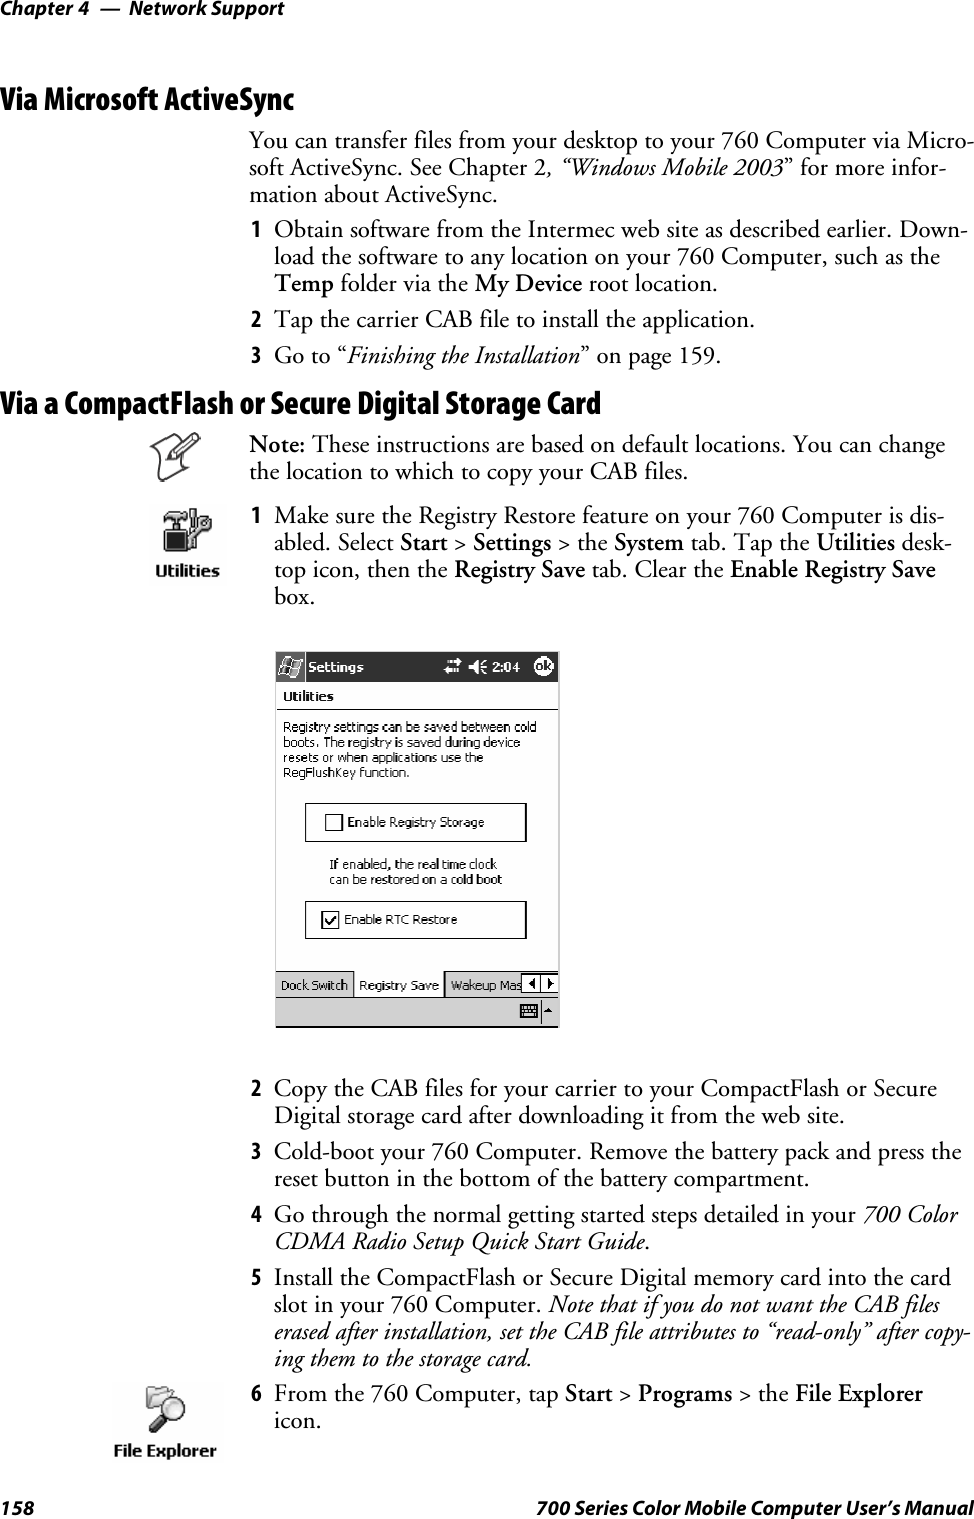 Network SupportChapter —4158 700 Series Color Mobile Computer User’s ManualVia Microsoft ActiveSyncYou can transfer files from your desktop to your 760 Computer via Micro-soft ActiveSync. See Chapter 2, “Windows Mobile 2003” for more infor-mation about ActiveSync.1Obtain software from the Intermec web site as described earlier. Down-load the software to any location on your 760 Computer, such as theTemp folder via the My Device root location.2Tap the carrier CAB file to install the application.3Go to “Finishing the Installation” on page 159.Via a CompactFlash or Secure Digital Storage CardNote: These instructions are based on default locations. You can changethe location to which to copy your CAB files.1Make sure the Registry Restore feature on your 760 Computer is dis-abled. Select Start &gt;Settings &gt;theSystem tab. Tap the Utilities desk-top icon, then the Registry Save tab. Clear the Enable Registry Savebox.2Copy the CAB files for your carrier to your CompactFlash or SecureDigital storage card after downloading it from the web site.3Cold-boot your 760 Computer. Remove the battery pack and press thereset button in the bottom of the battery compartment.4Go through the normal getting started steps detailed in your 700 ColorCDMA Radio Setup Quick Start Guide.5Install the CompactFlash or Secure Digital memory card into the cardslot in your 760 Computer. Note that if you do not want the CAB fileserased after installation, set the CAB file attributes to “read-only” after copy-ing them to the storage card.6From the 760 Computer, tap Start &gt;Programs &gt;theFile Explorericon.